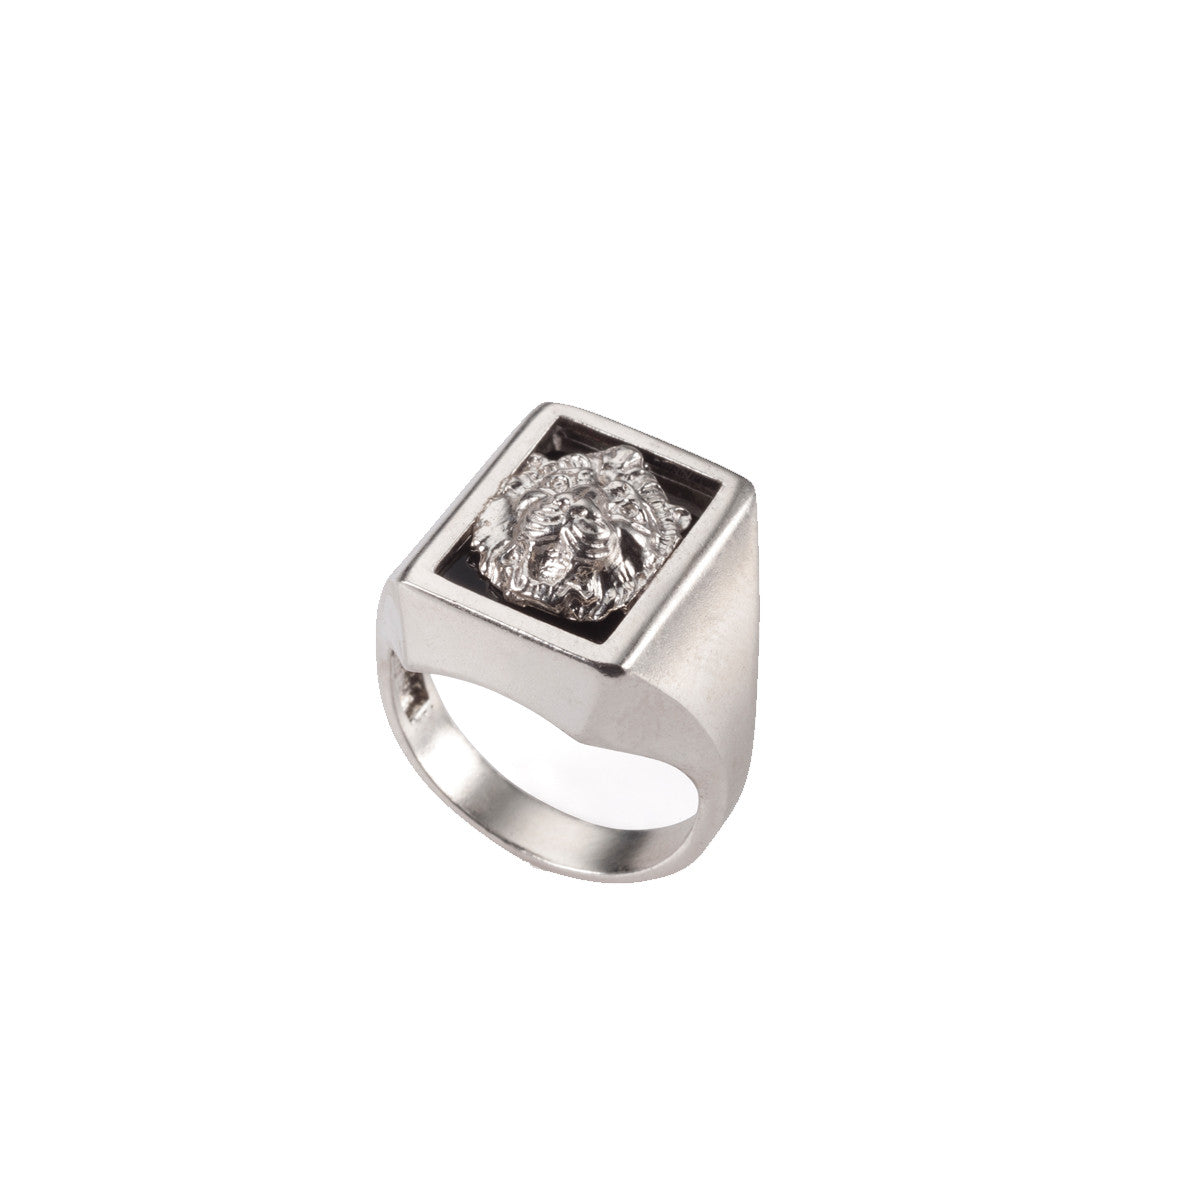 Silver lion signet ring